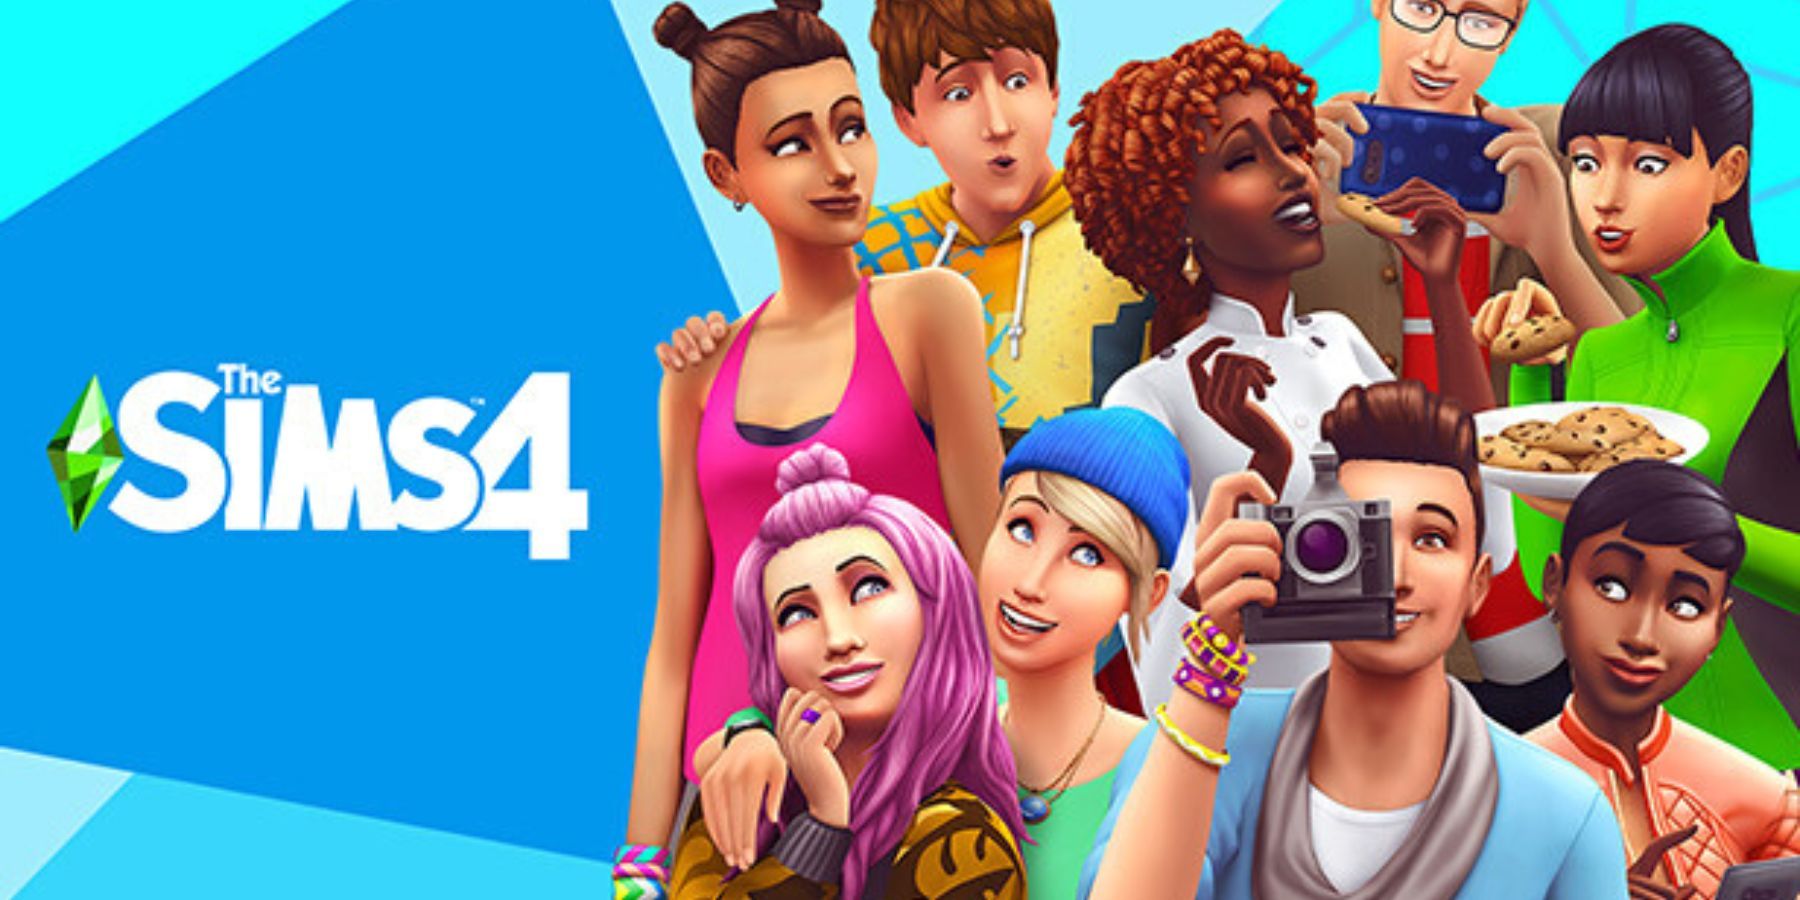 Skills Cheats - The Sims 4 Guide